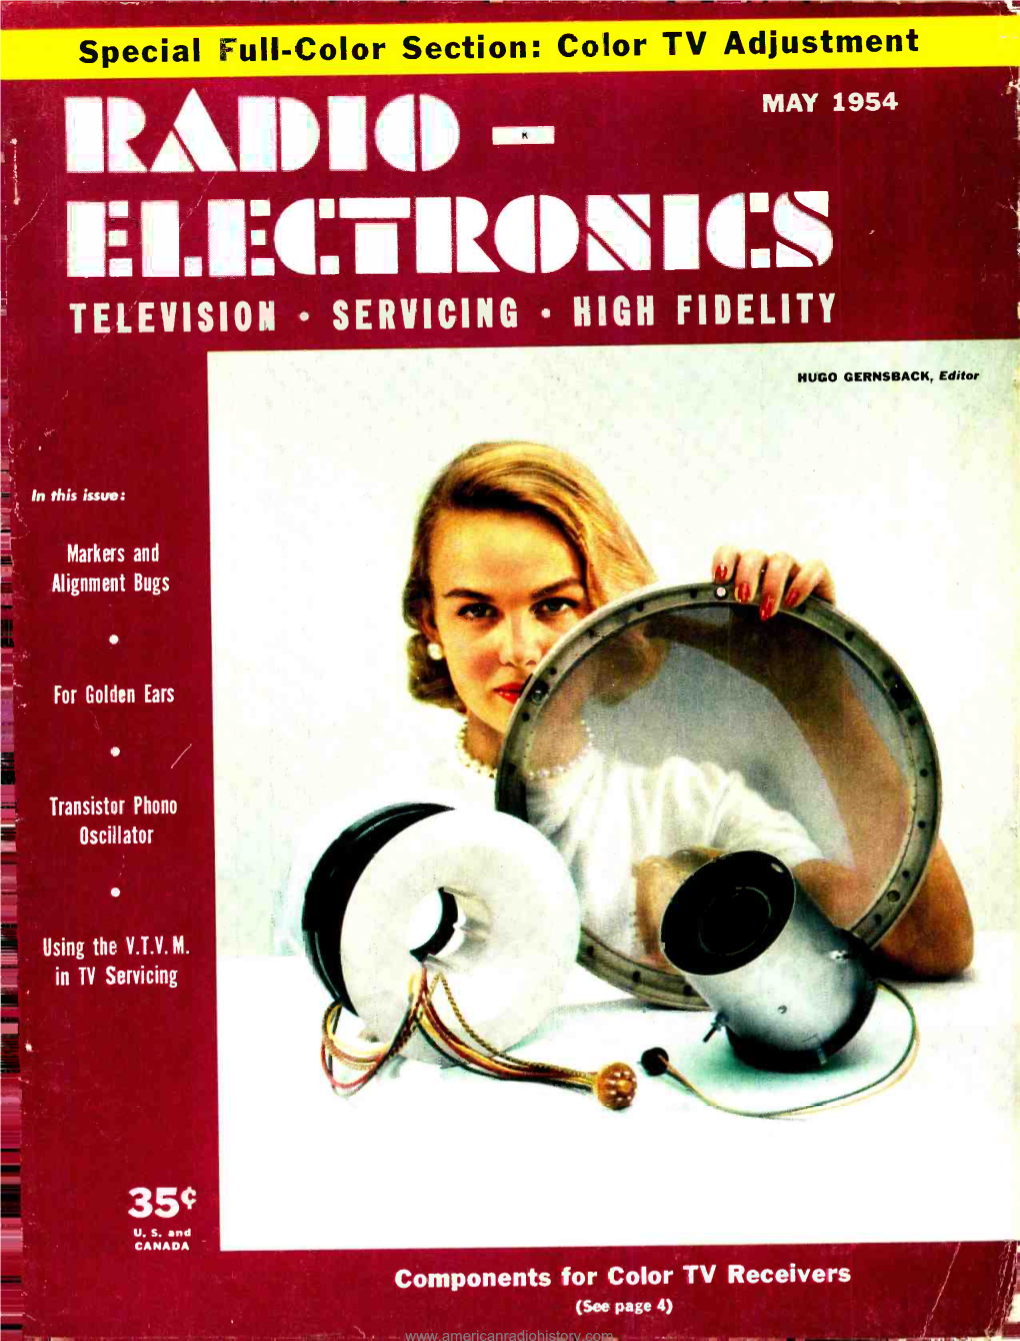 Ei.Iiic 111011111:S Television Servicing High Fidelity